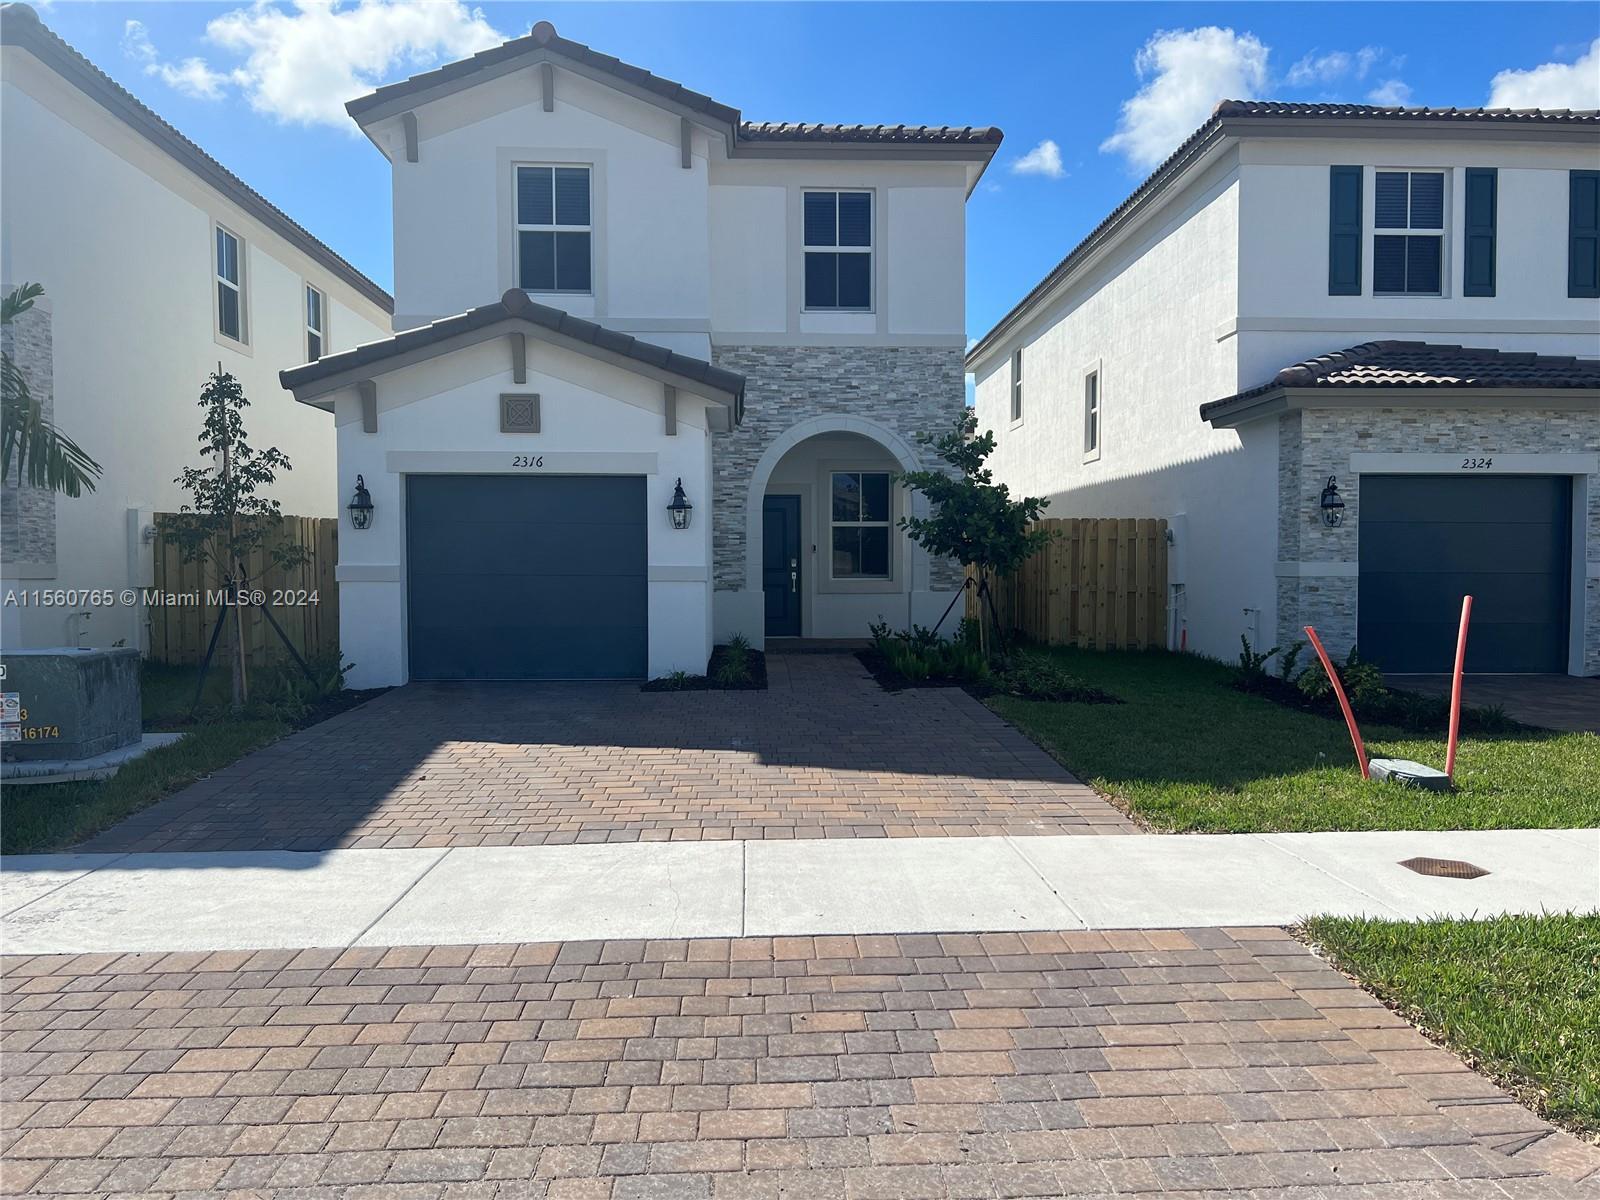 Photo of 2316 NW 130 Ter in Miami, FL